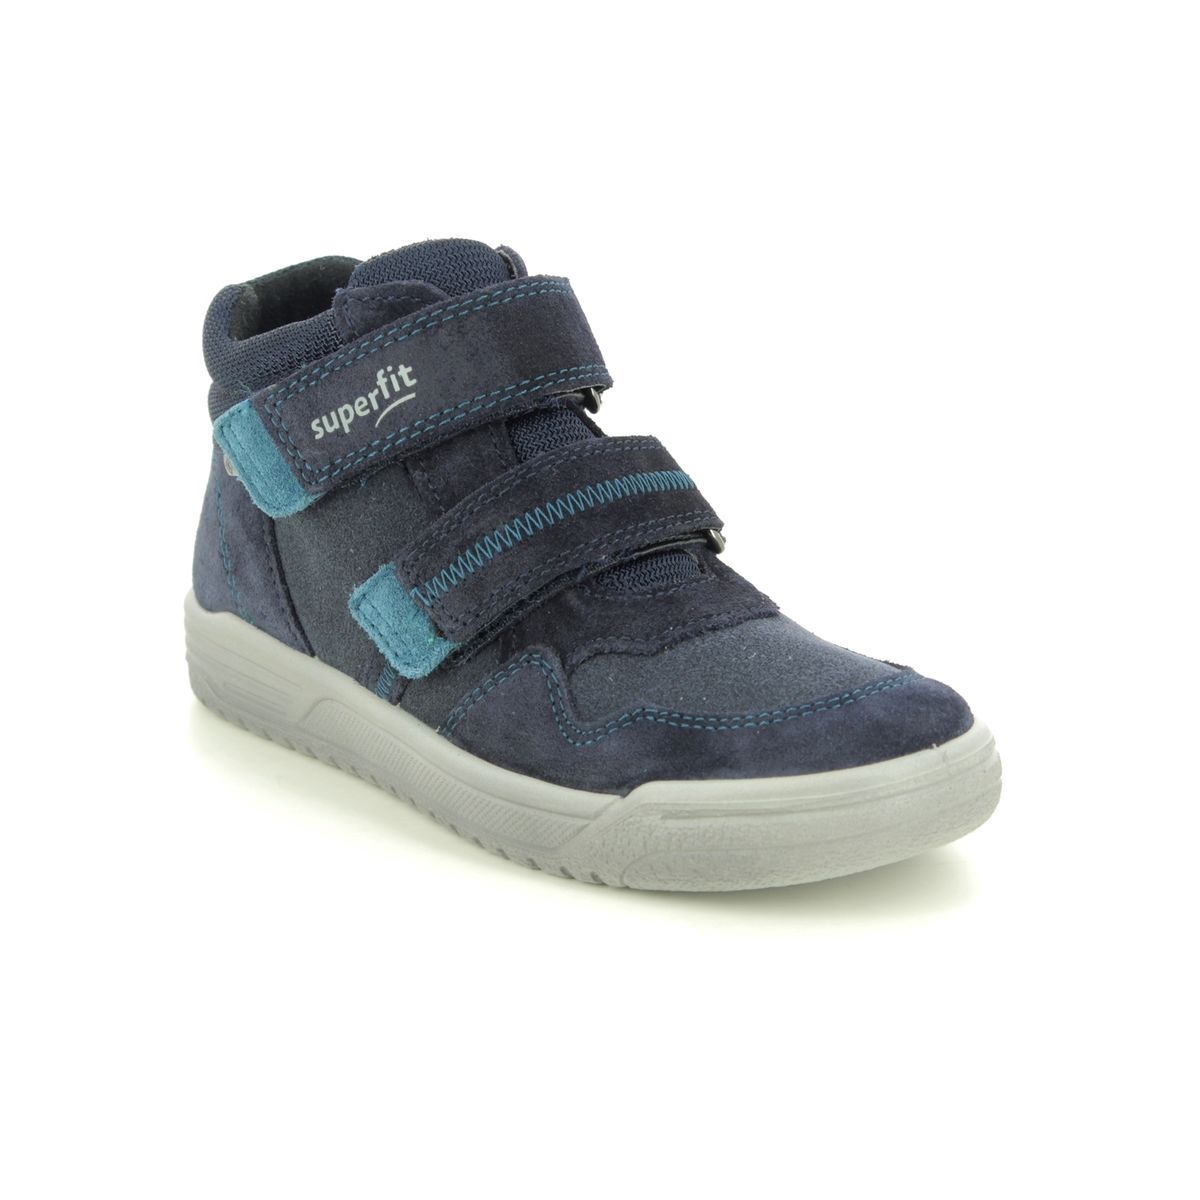 Superfit Earth Gtx Vel Navy Suede Kids Boys Boots 1009057-8000 In Size 32 In Plain Navy Suede For kids